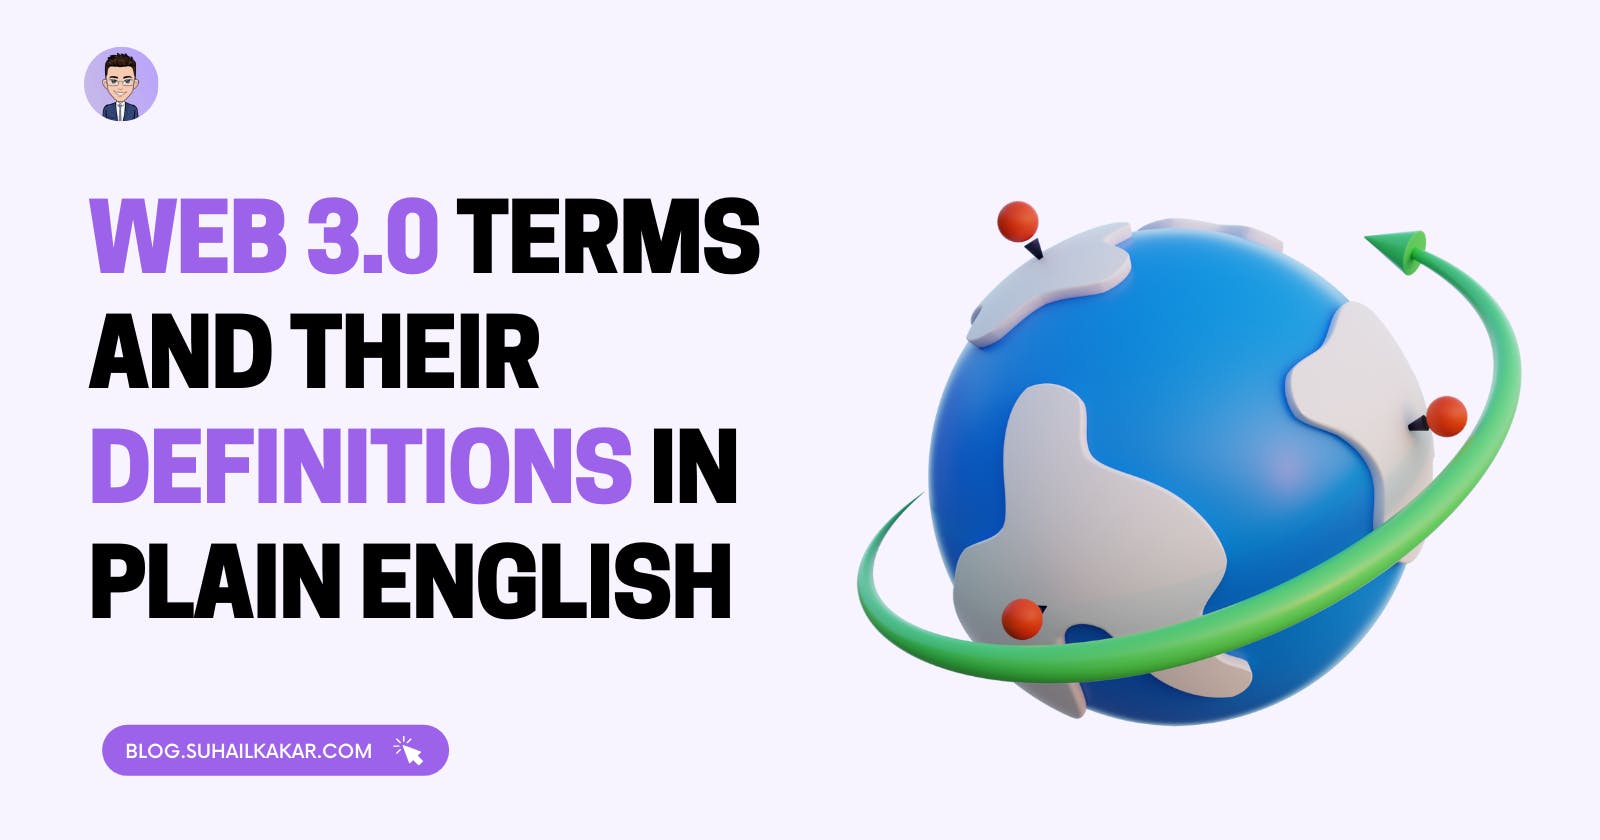 Web 3.0 Terms and Their Definitions in Plain English